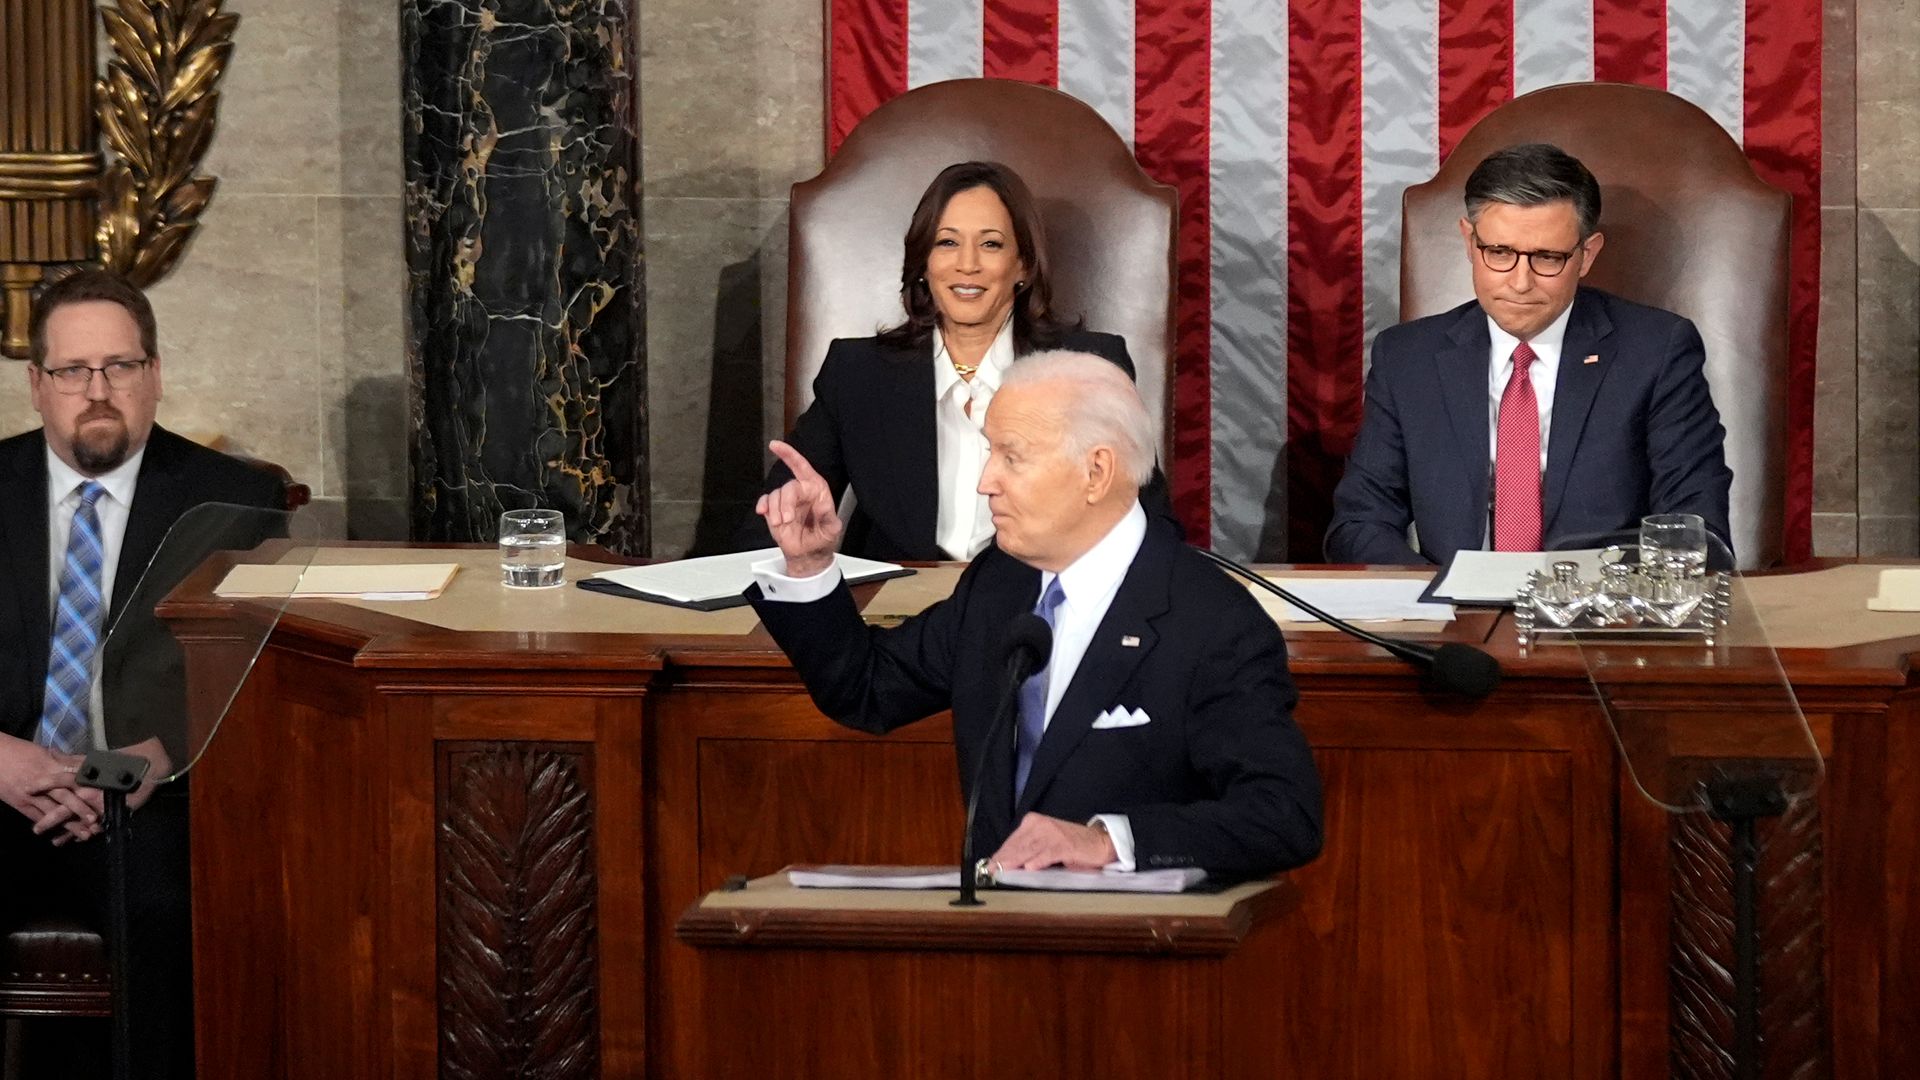 Biden effectively communicated how well the U.S. economy is doing, and Americans are finally acknowledging their shared economic progress.